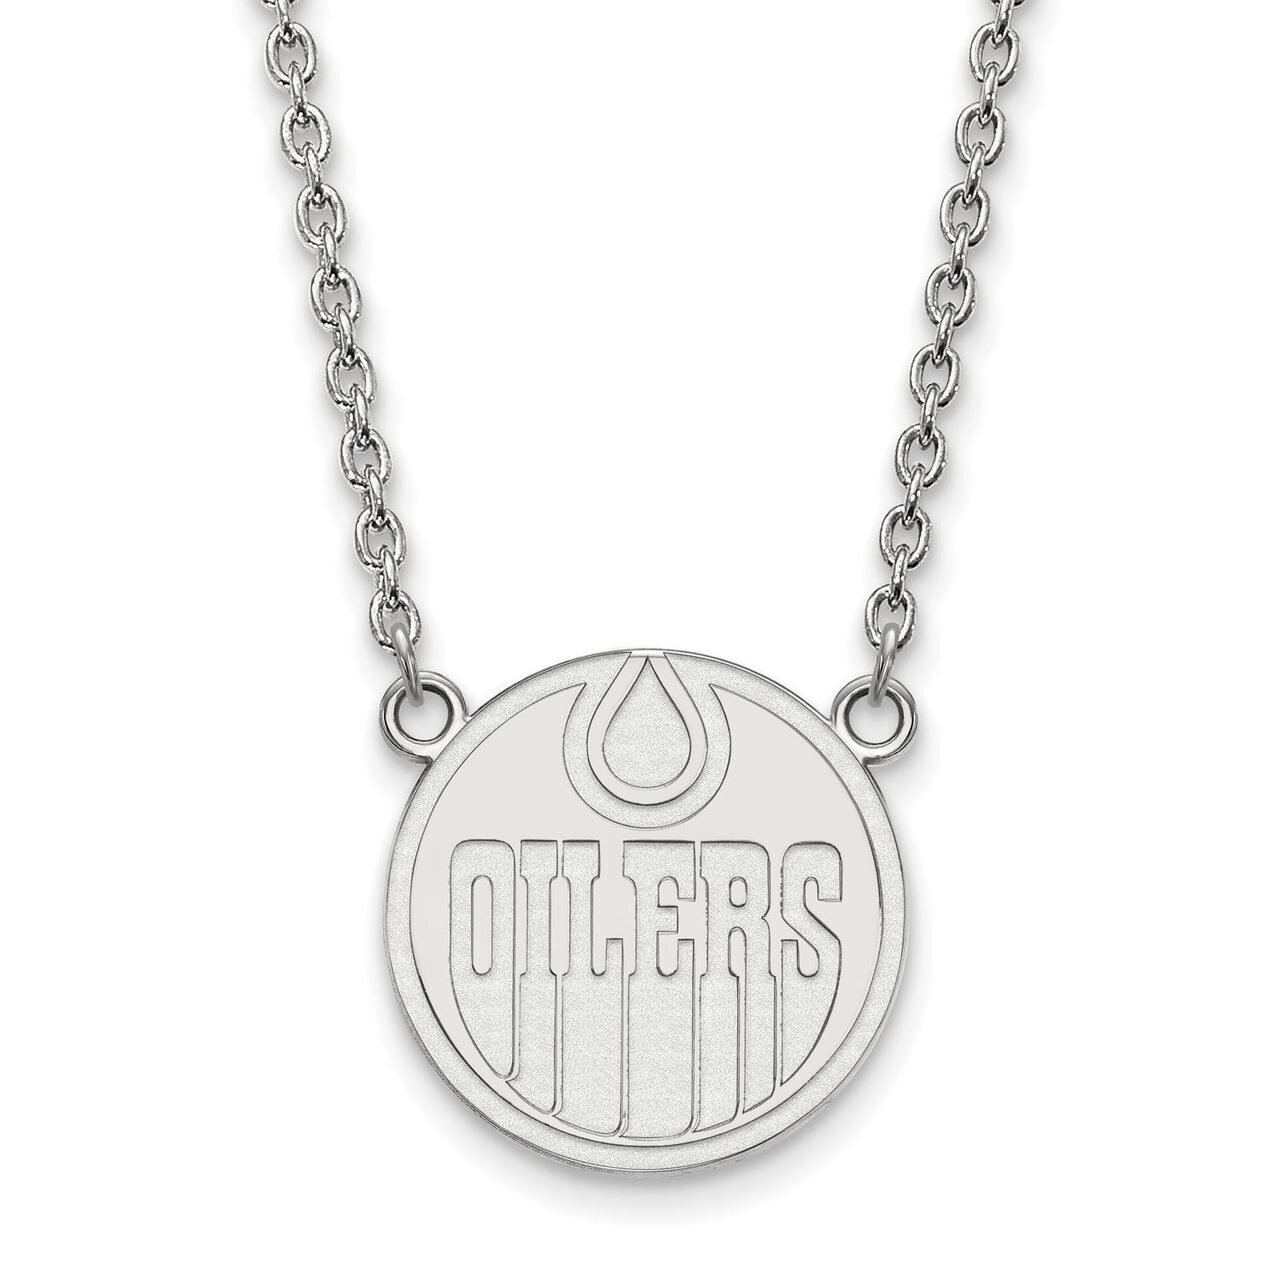 Edmonton Oilers Large Pendant with Chain Necklace 14k White Gold 4W008OIL-18